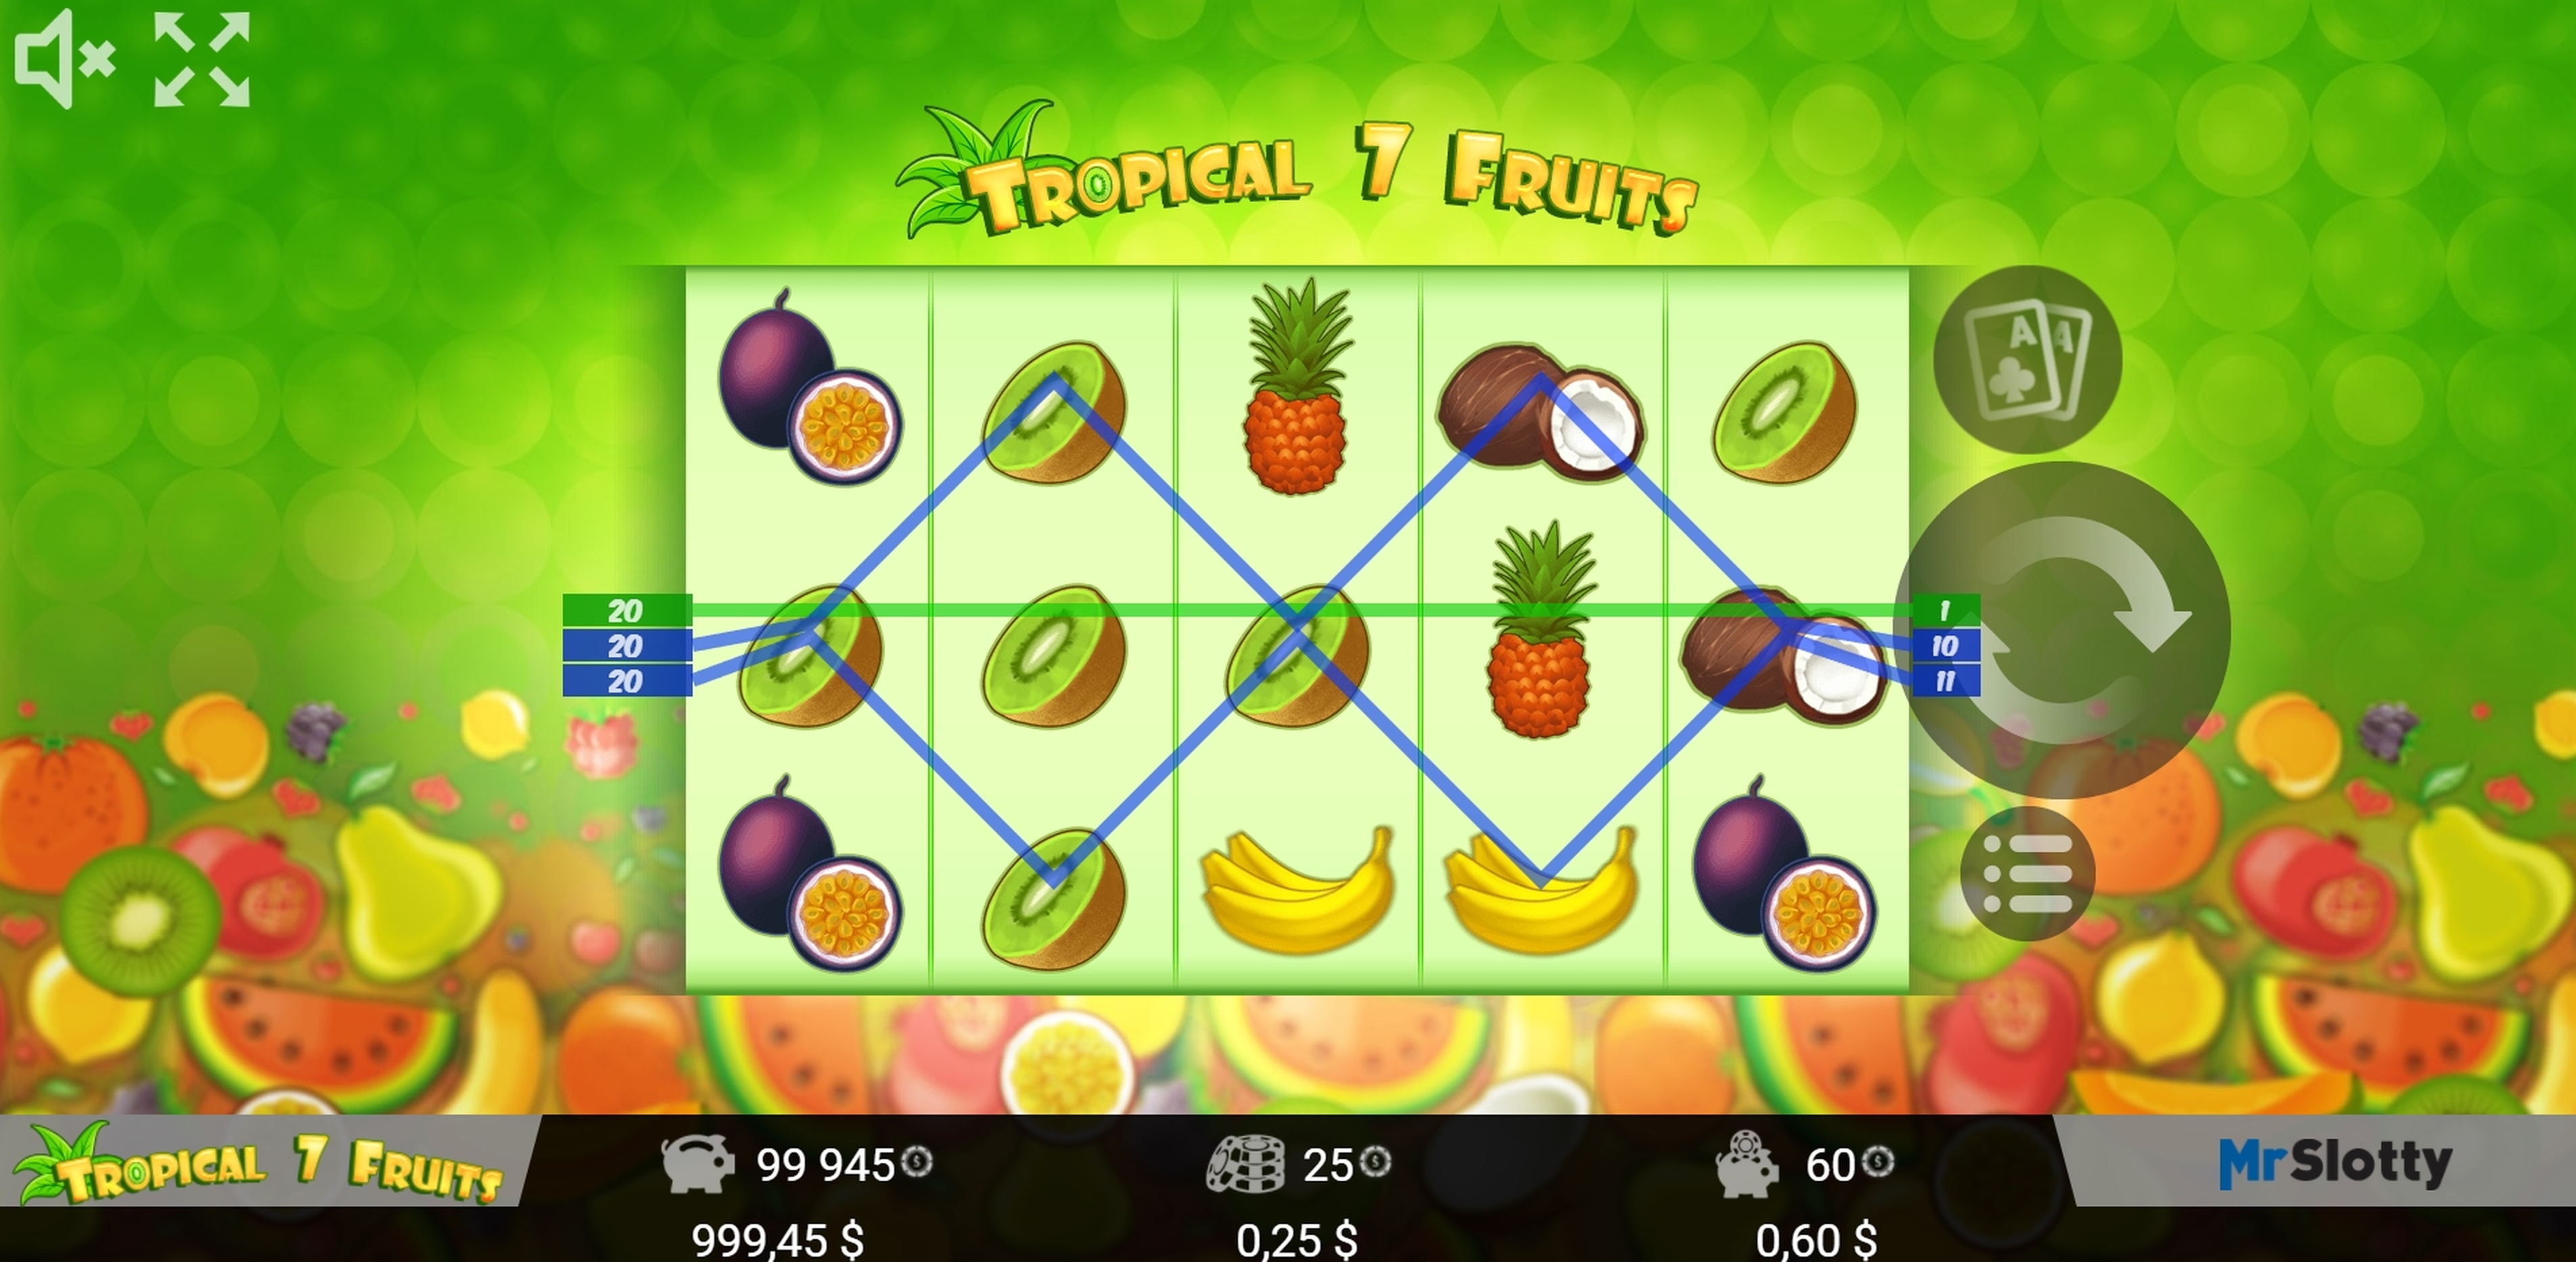 Win Money in Tropical7Fruits Free Slot Game by Mr Slotty